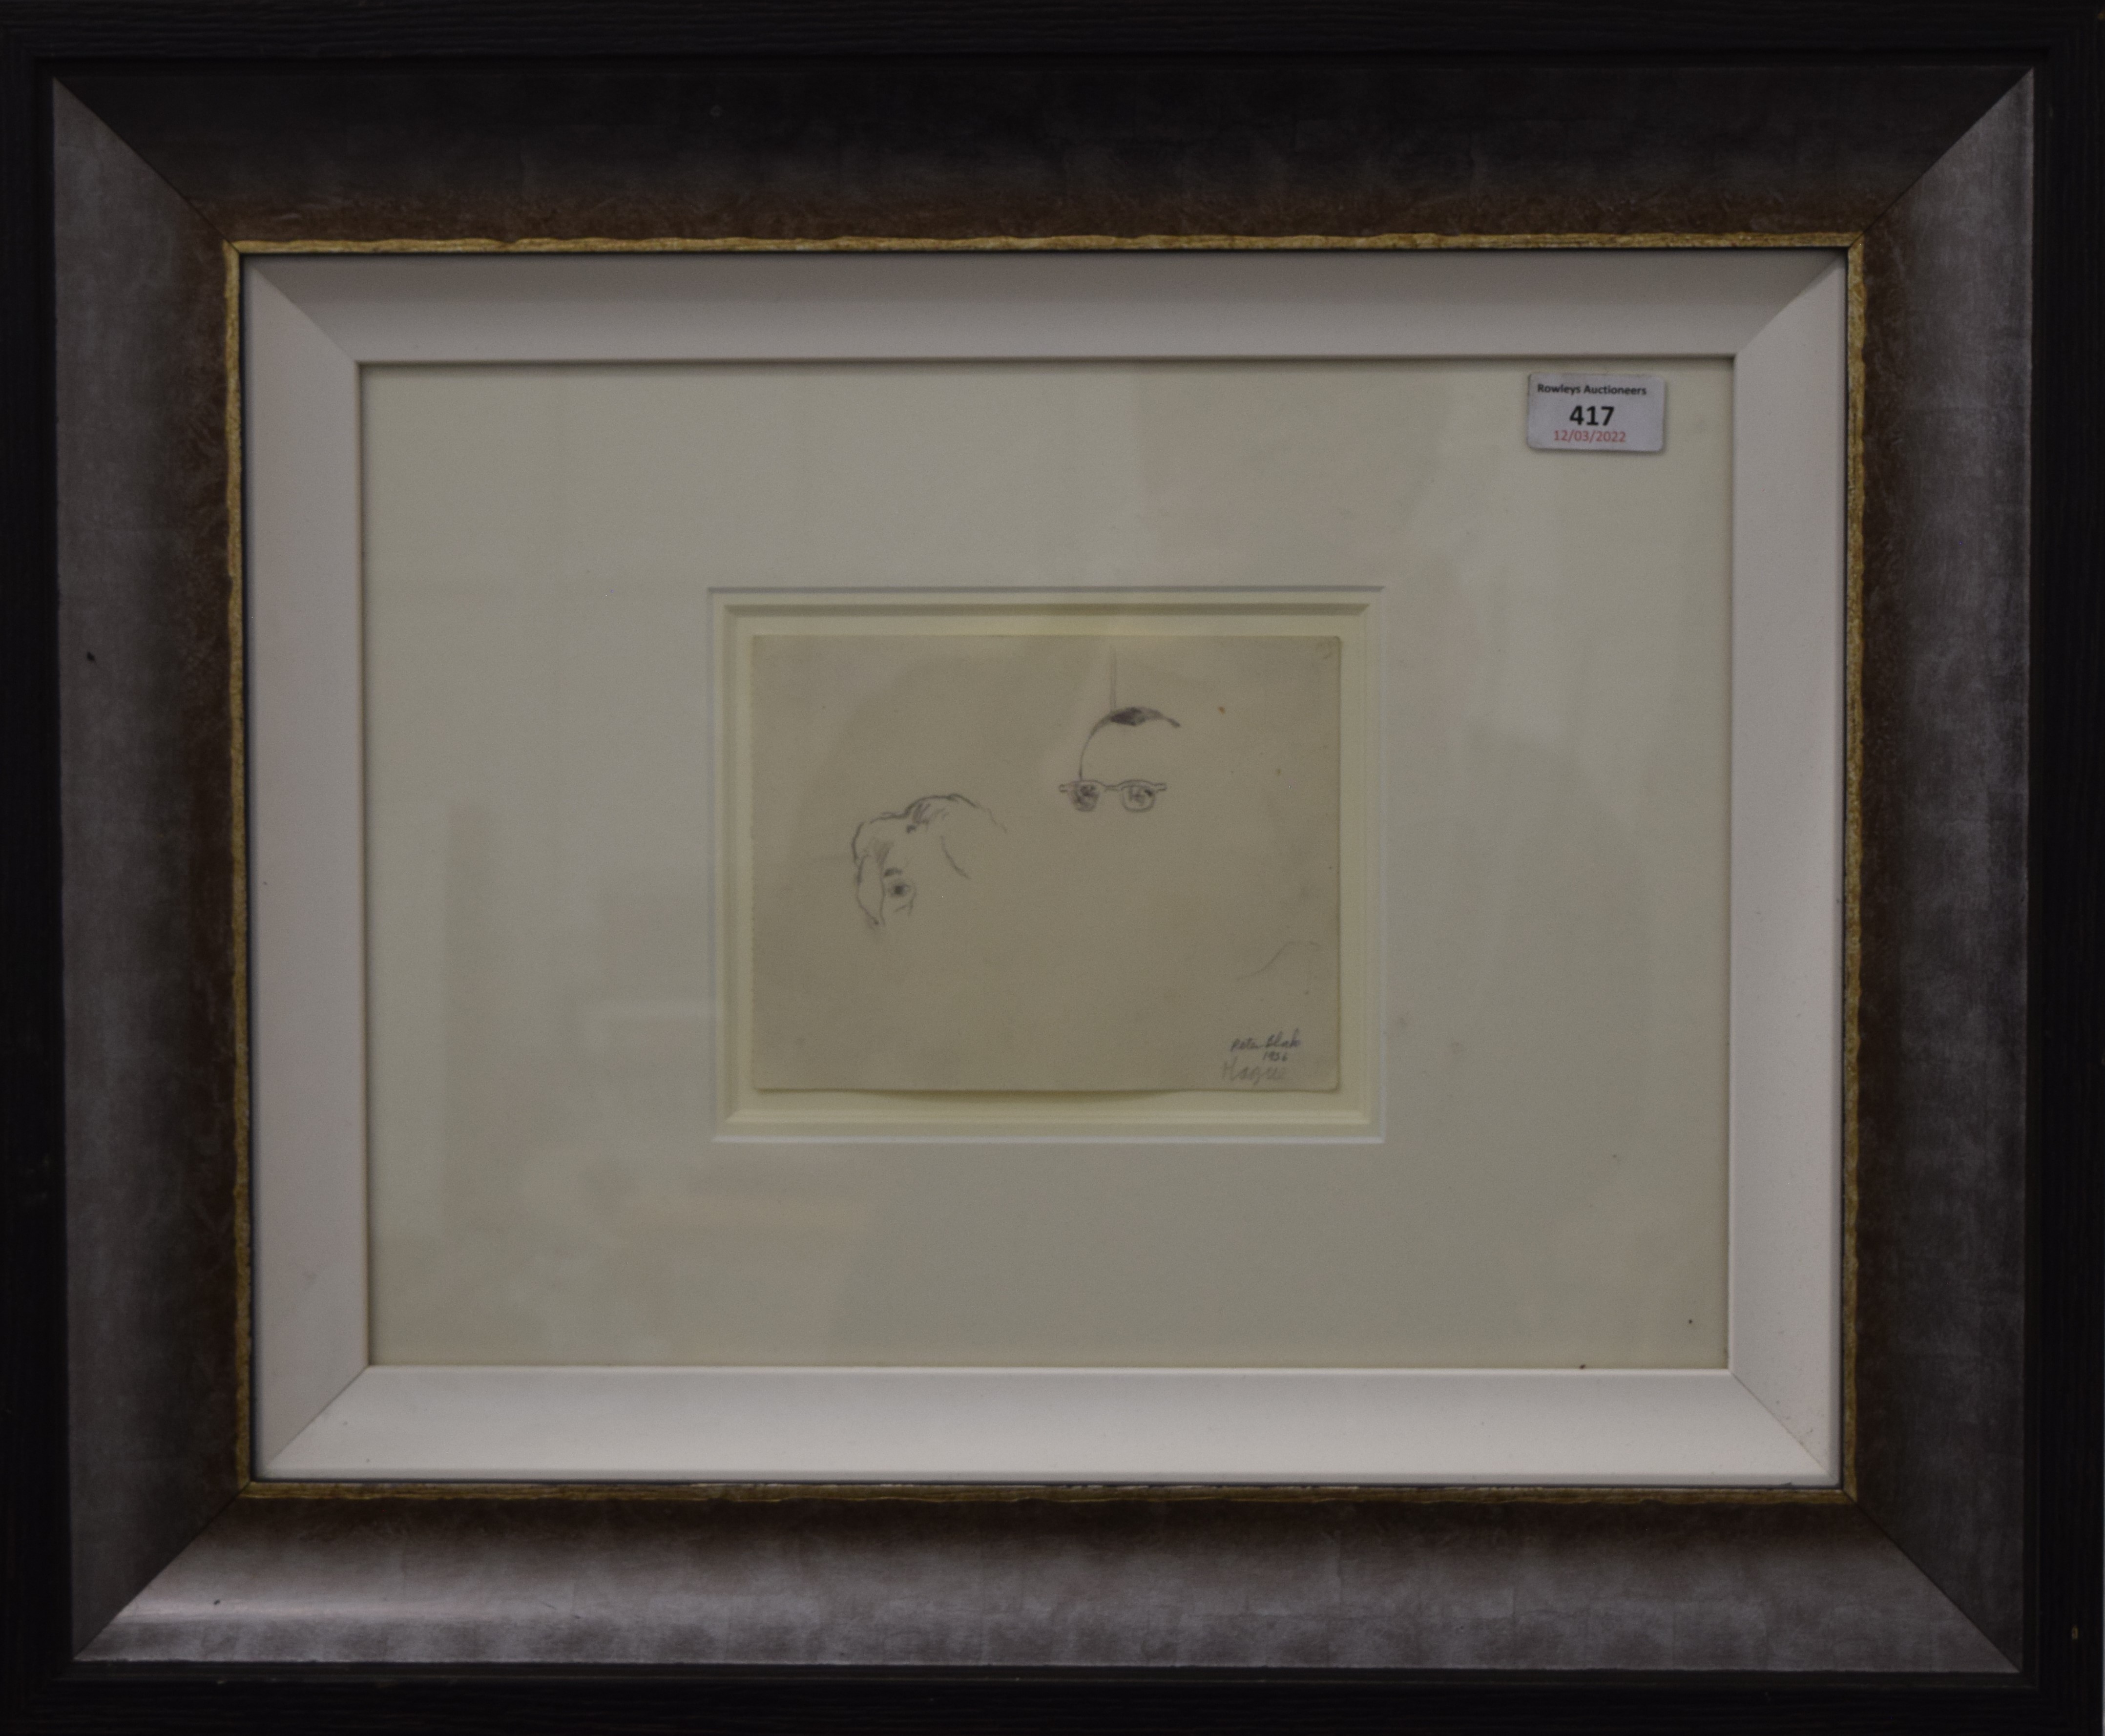 PETER BLAKE (born 1932) British, Hague, pencil sketch on paper, signed and dated 1956, - Image 2 of 3